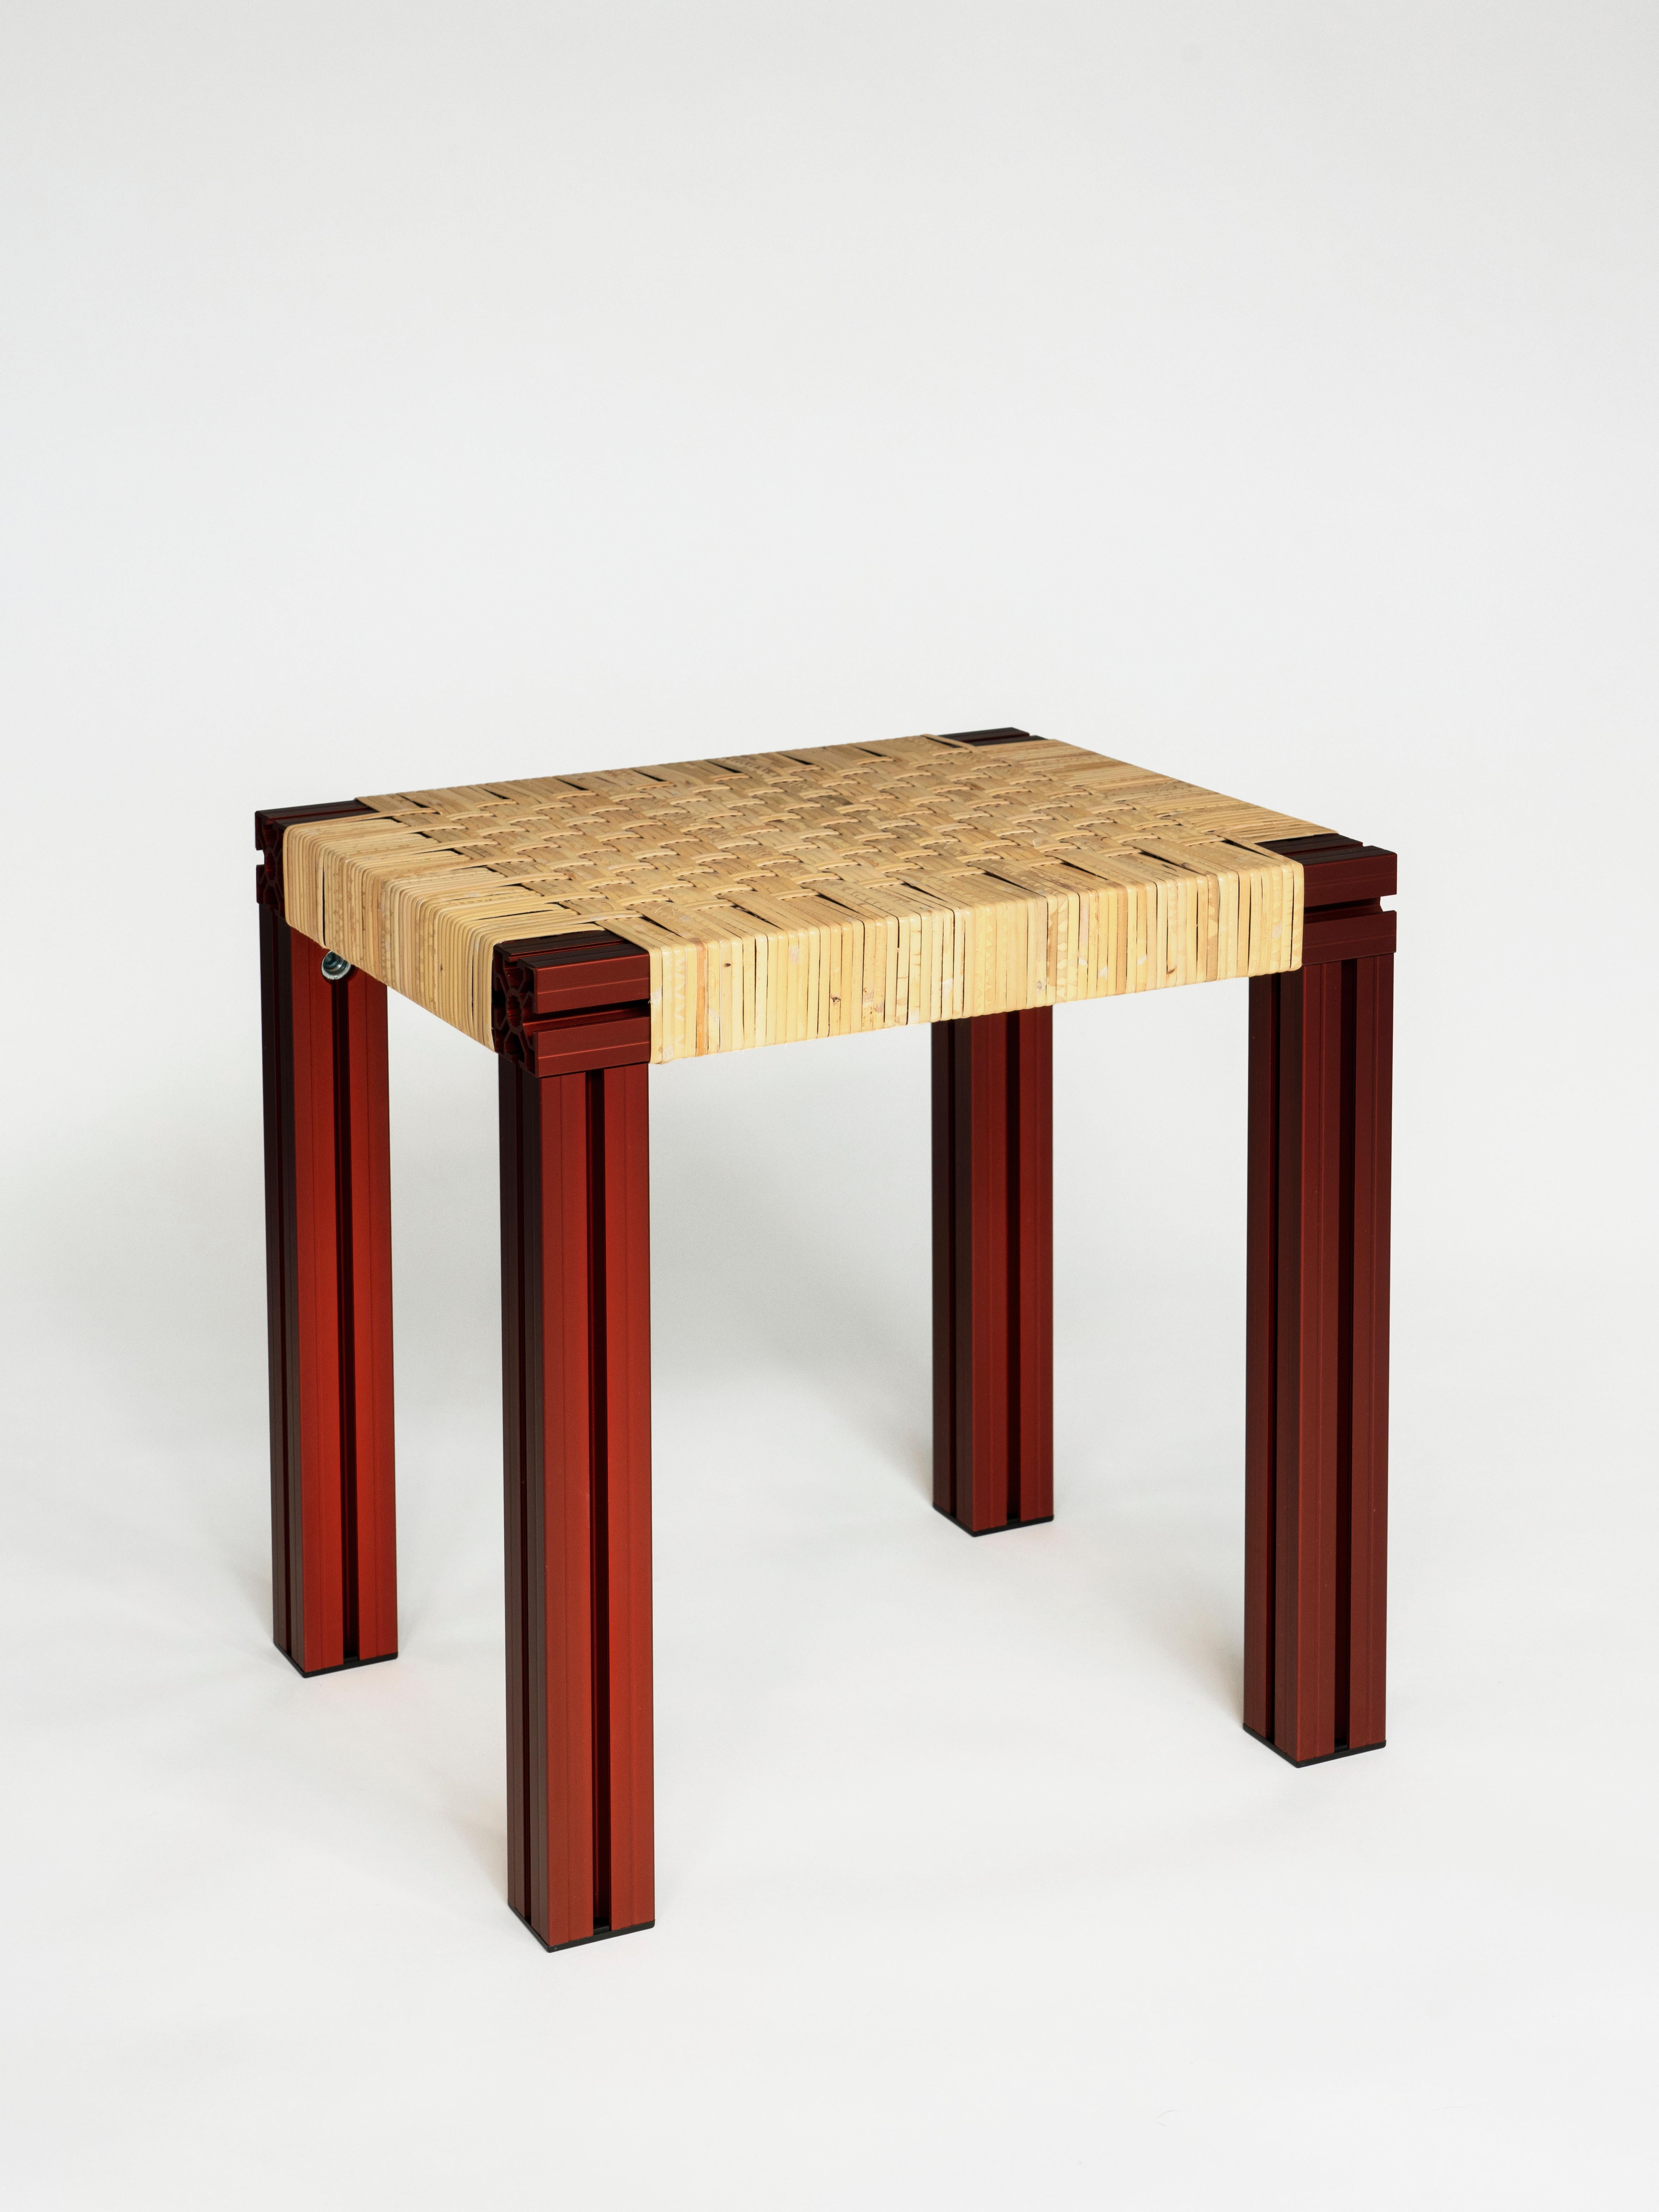 Anodised Burgundy and Cane wicker stool by Tino Seubert
Dimensions: D 43 x W 38 x H 45 cm.
Materials: Color anodized aluminum extrusions, cane weave.

Tino Seubert
When he first made his now signature wicker and aluminium stools and benches in